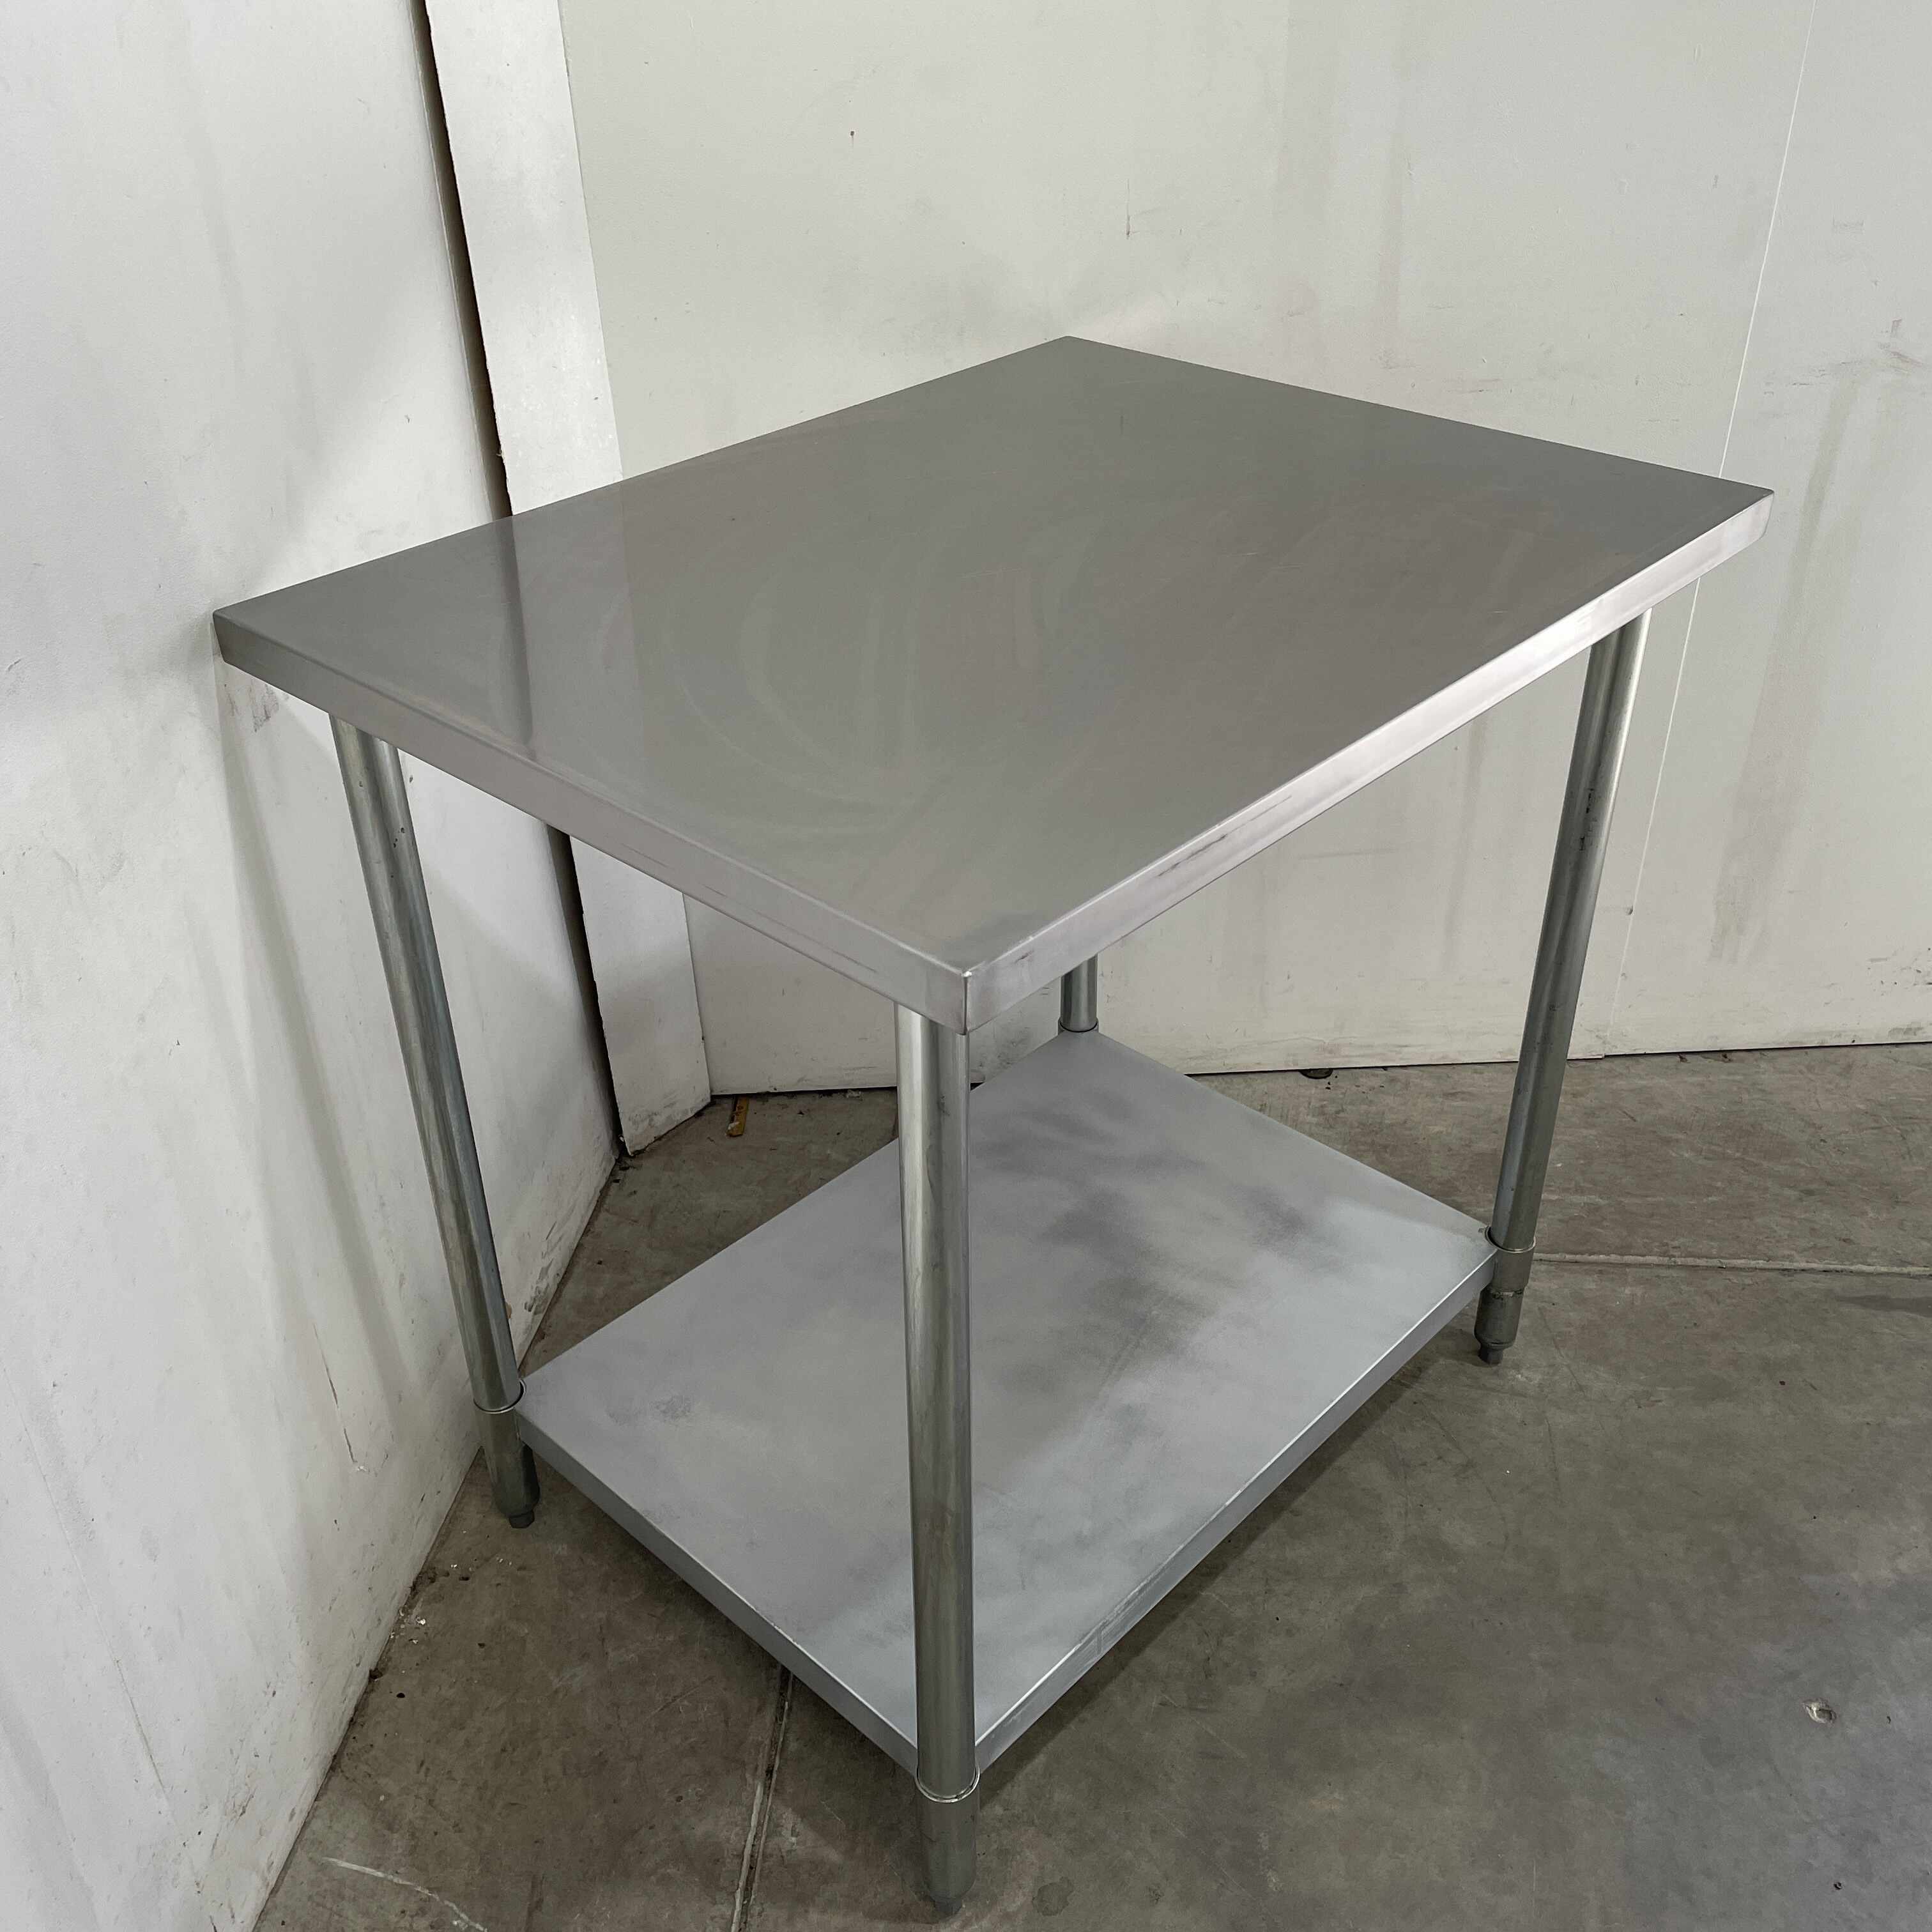 Thumbnail - Simply Stainless Bench 900mm x 700mm